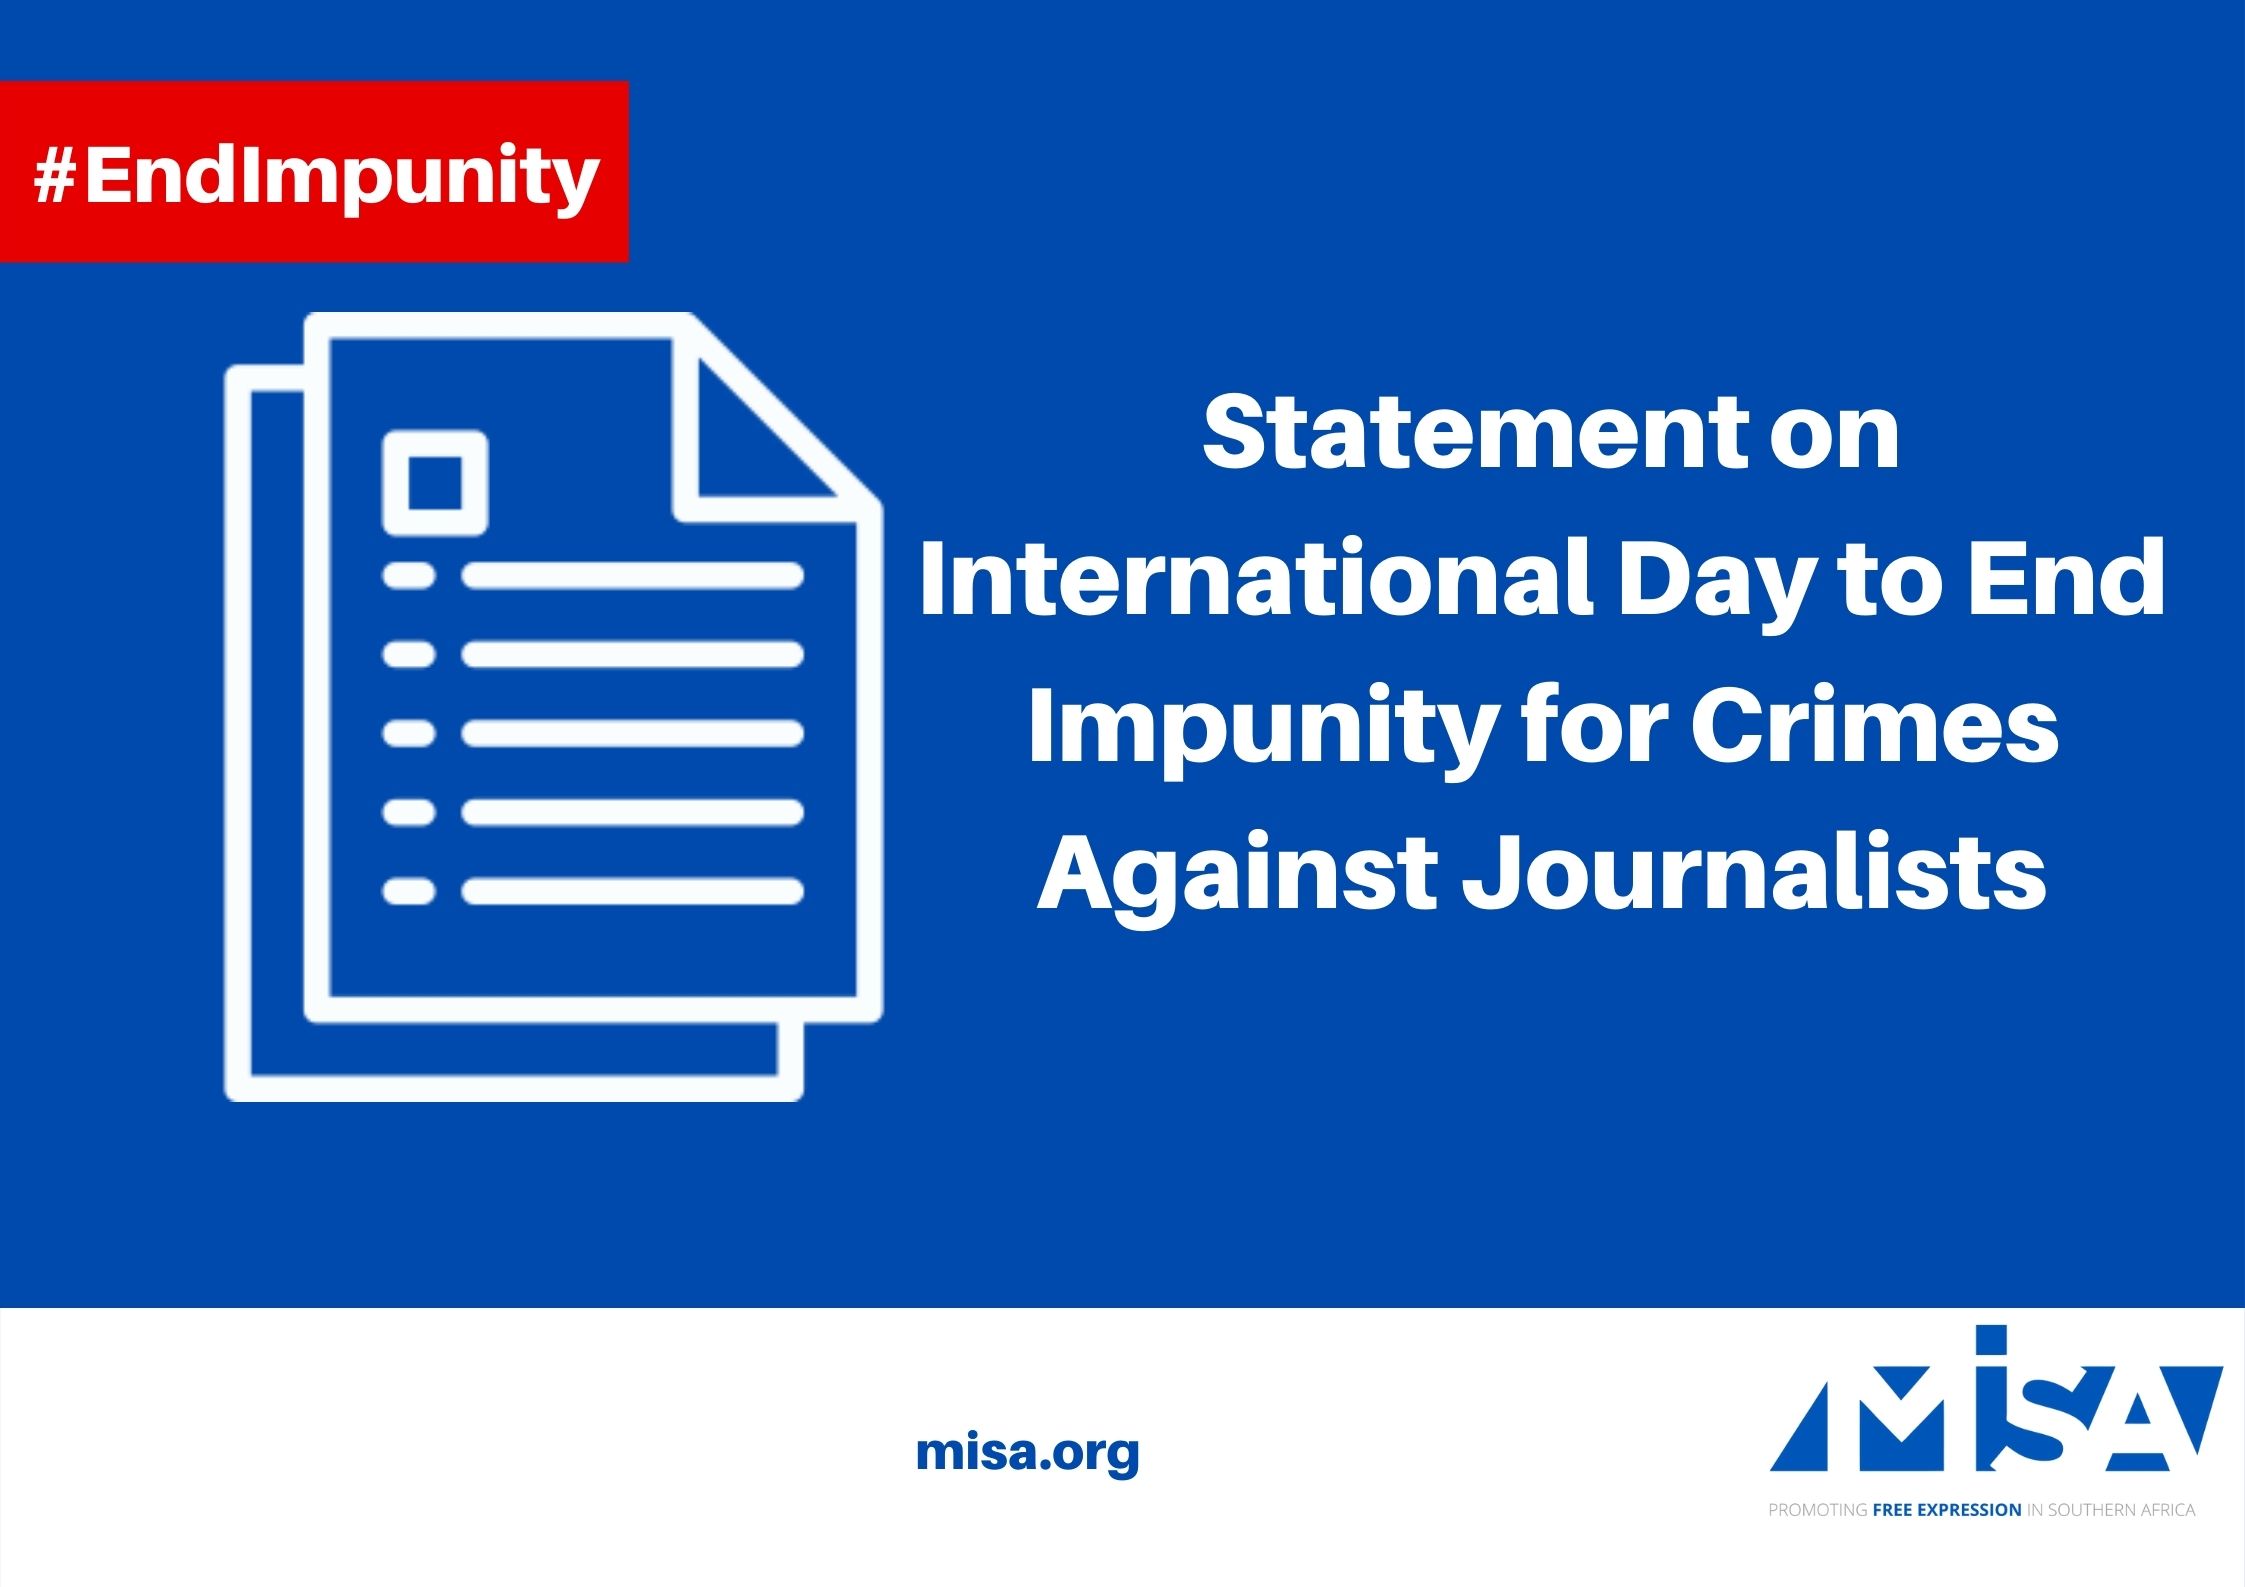 MISA Regional Statement on International Day to End Impunity for Crimes Against Journalists